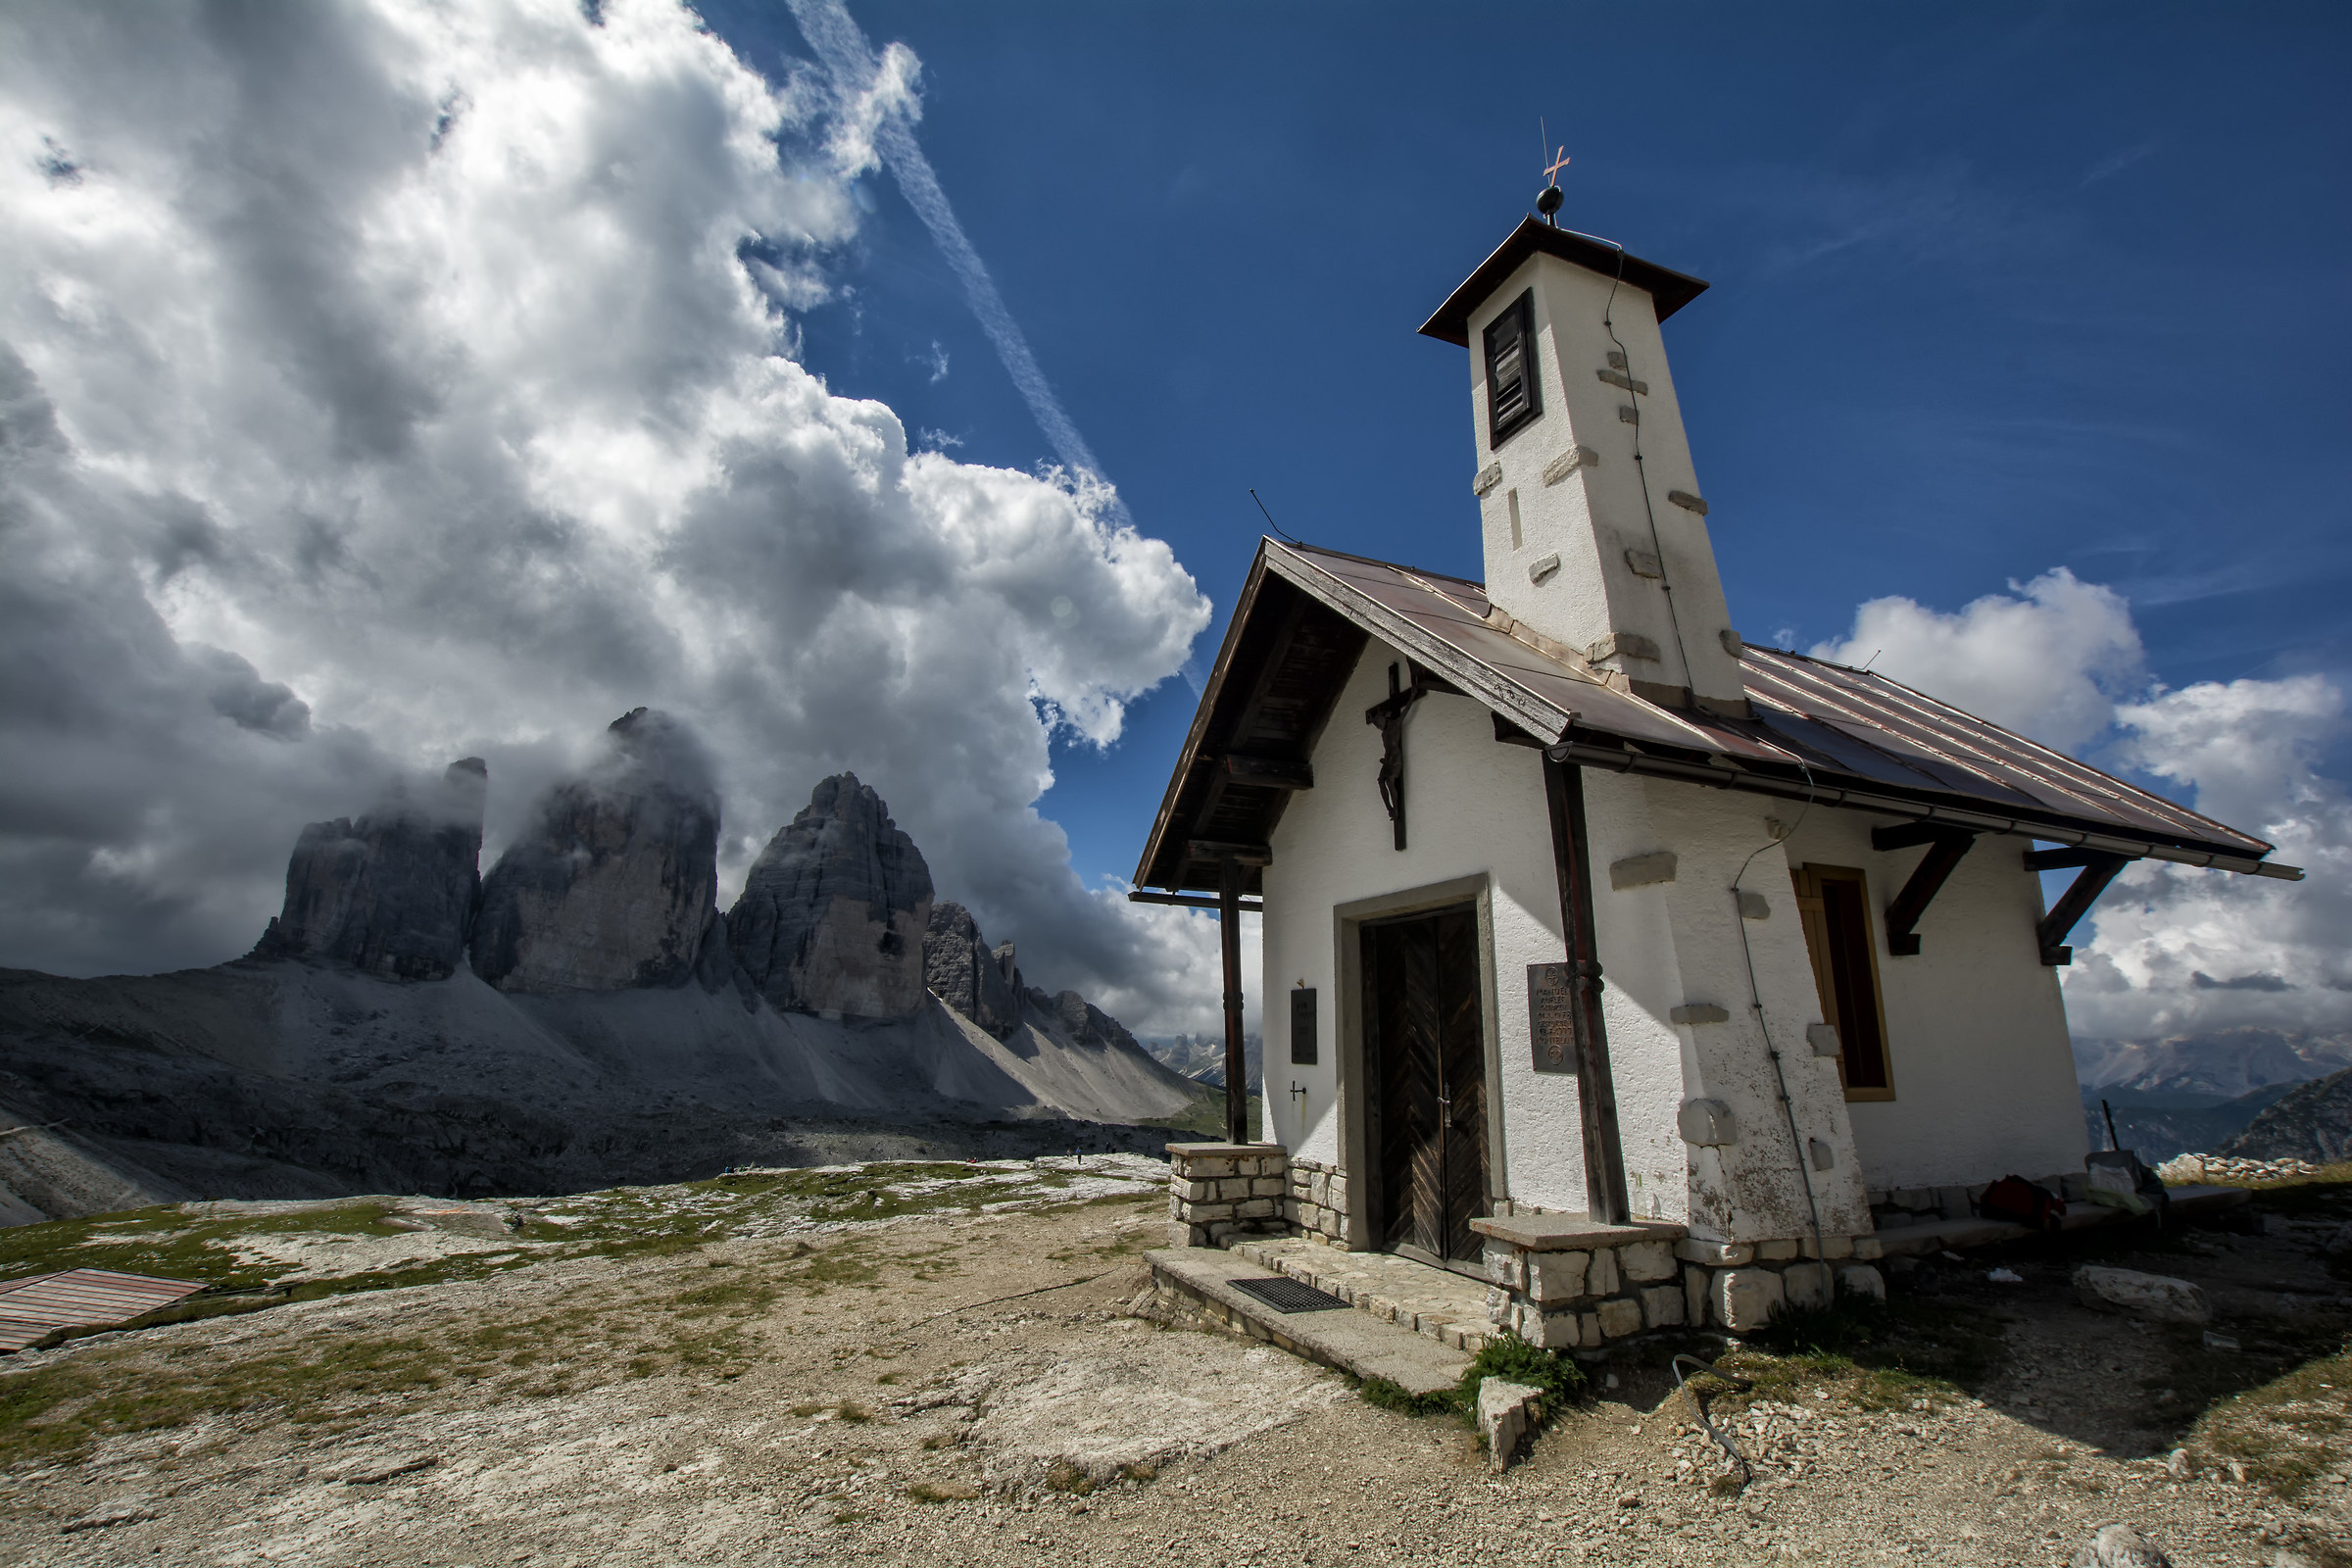 The queens of the Dolomites and the church .....